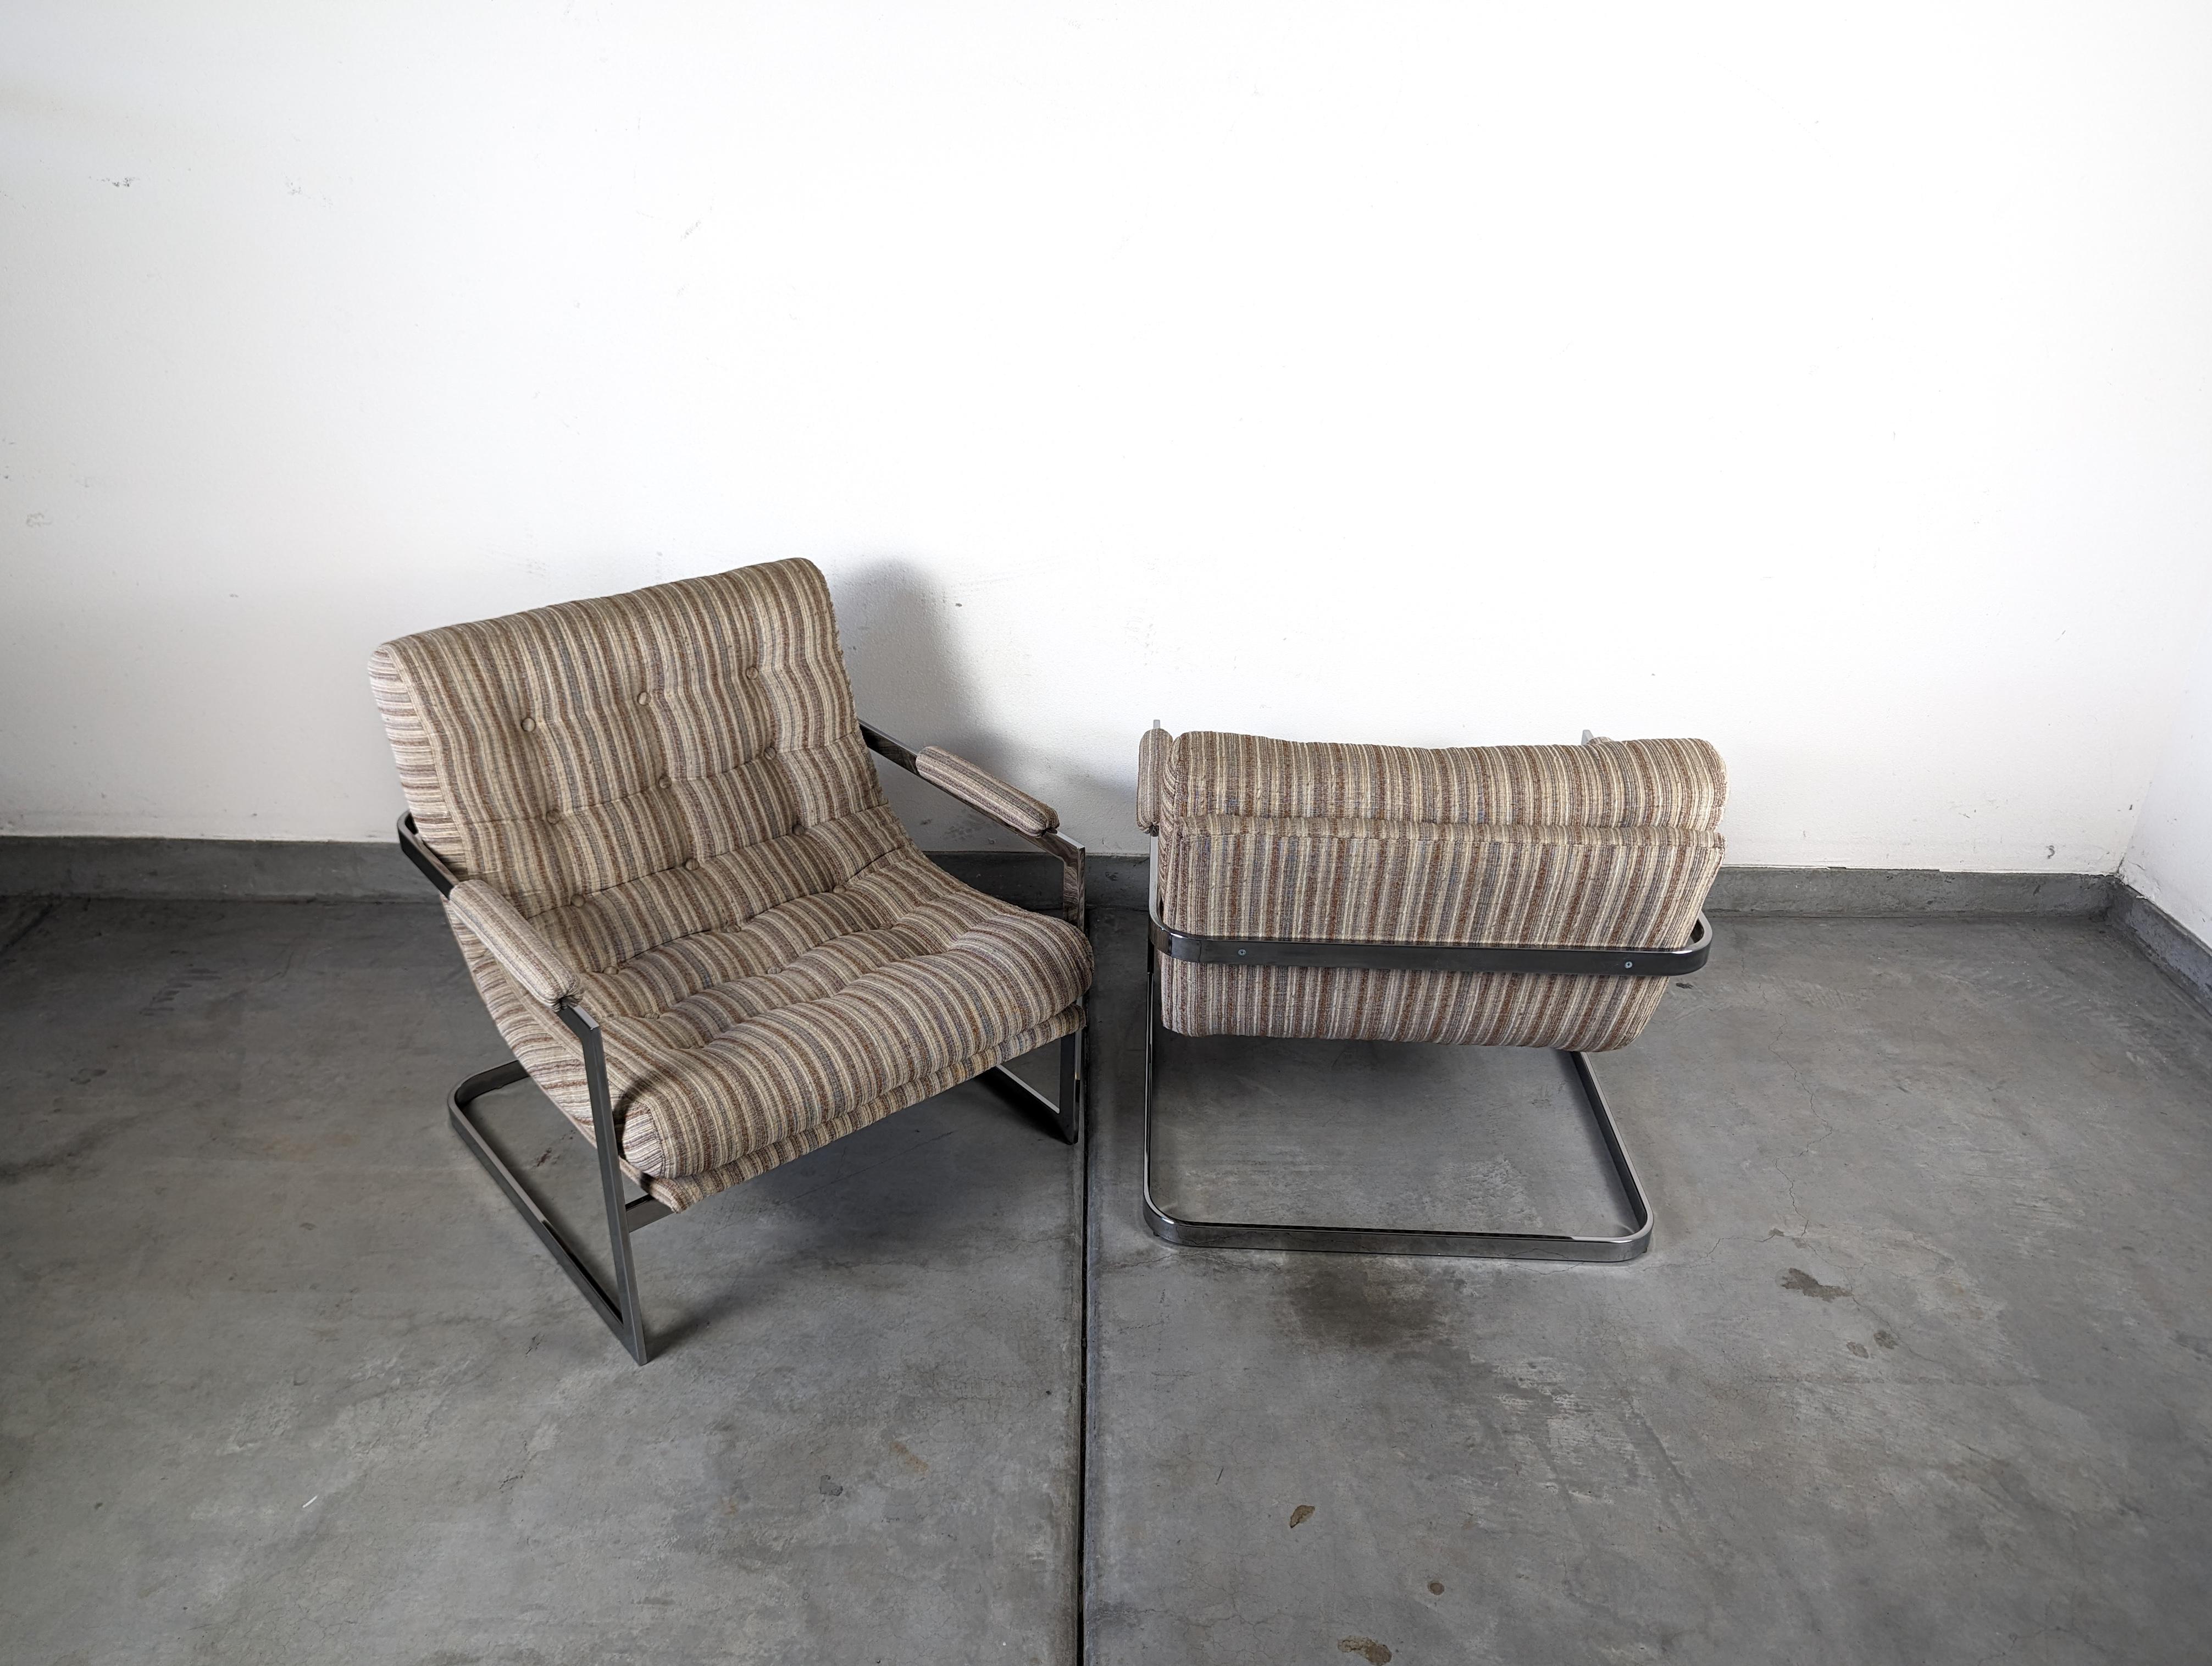 American Pair of Mid Century Cantilevered Scoop Chairs - Style of Milo Baughman, c1970s